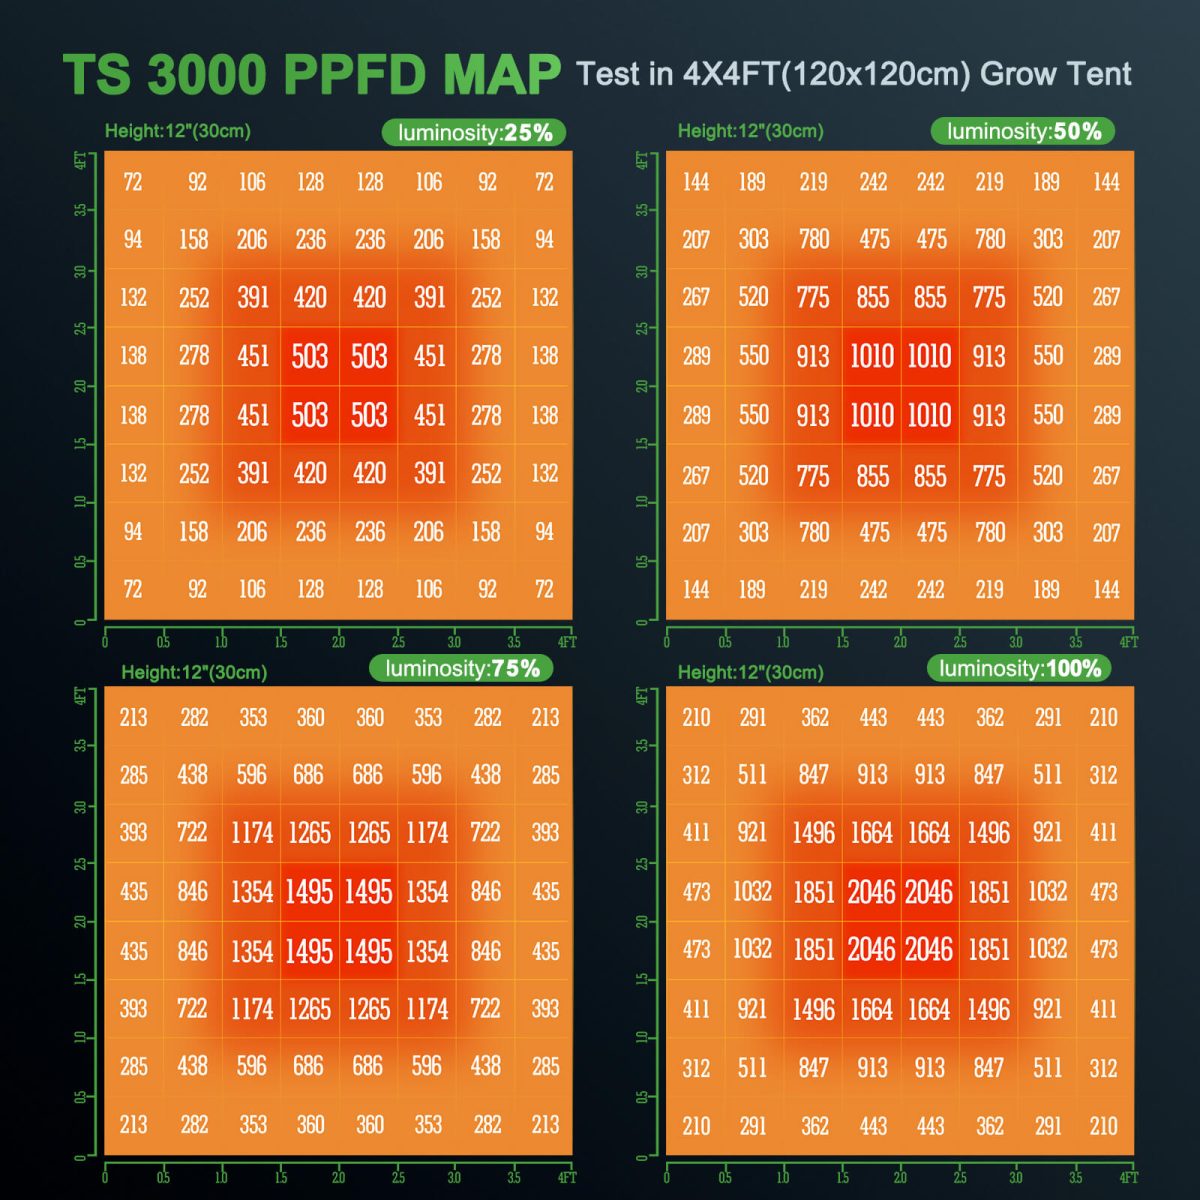 PPFD map of TS 3000 LED, test in 4x4 tent, 12'' height, and differnt luminosity of 25%, 50%, 75% and 100%